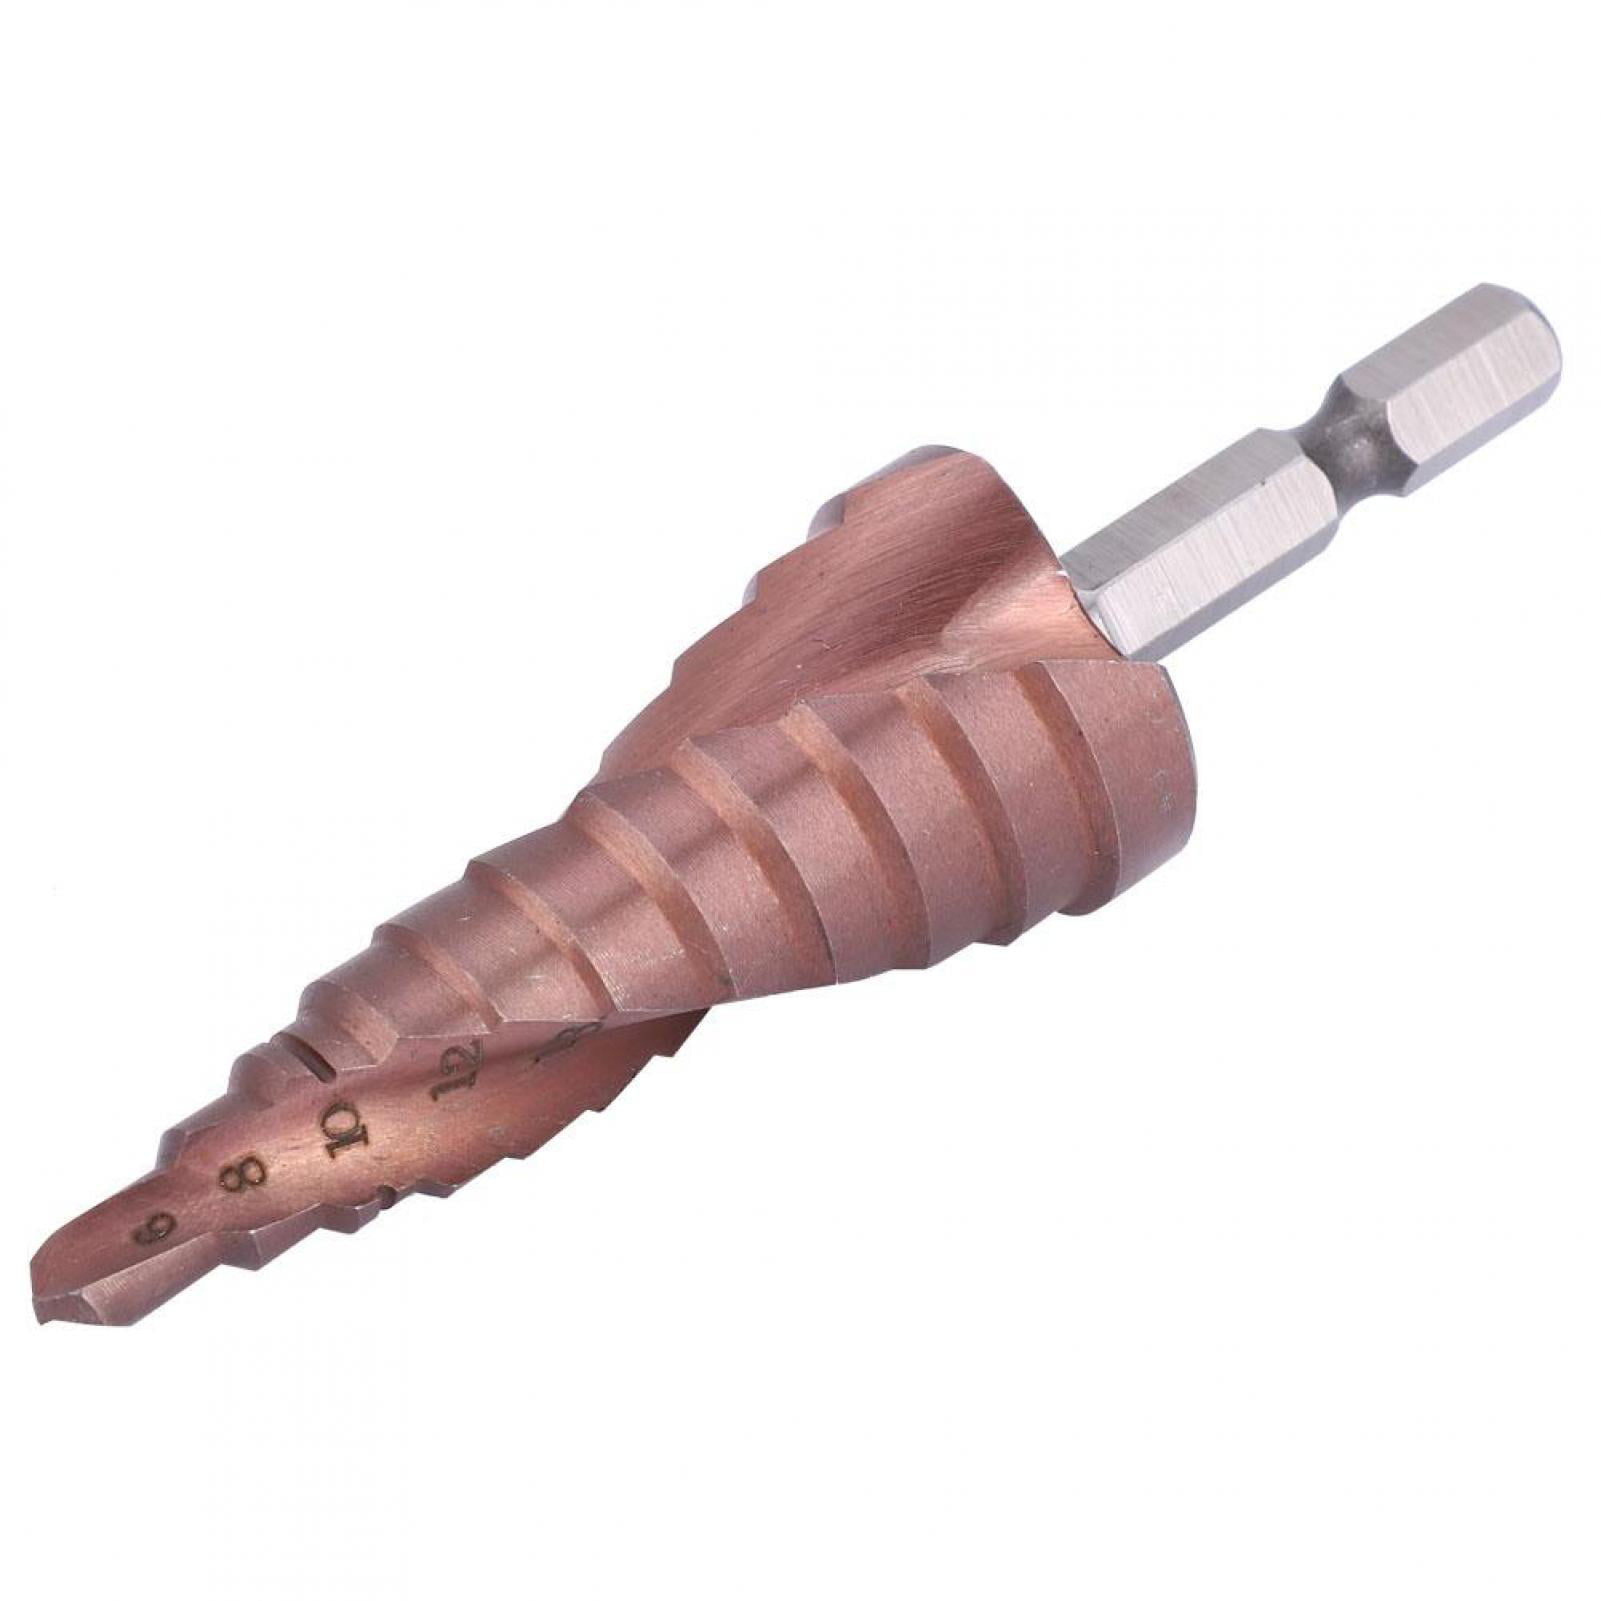 4-22 Step Drill Bit for Perforating Various Materials No Need for Center Punch Not Easy to Break Cobalt Coating High Strength High Speed Steel Drill Bit